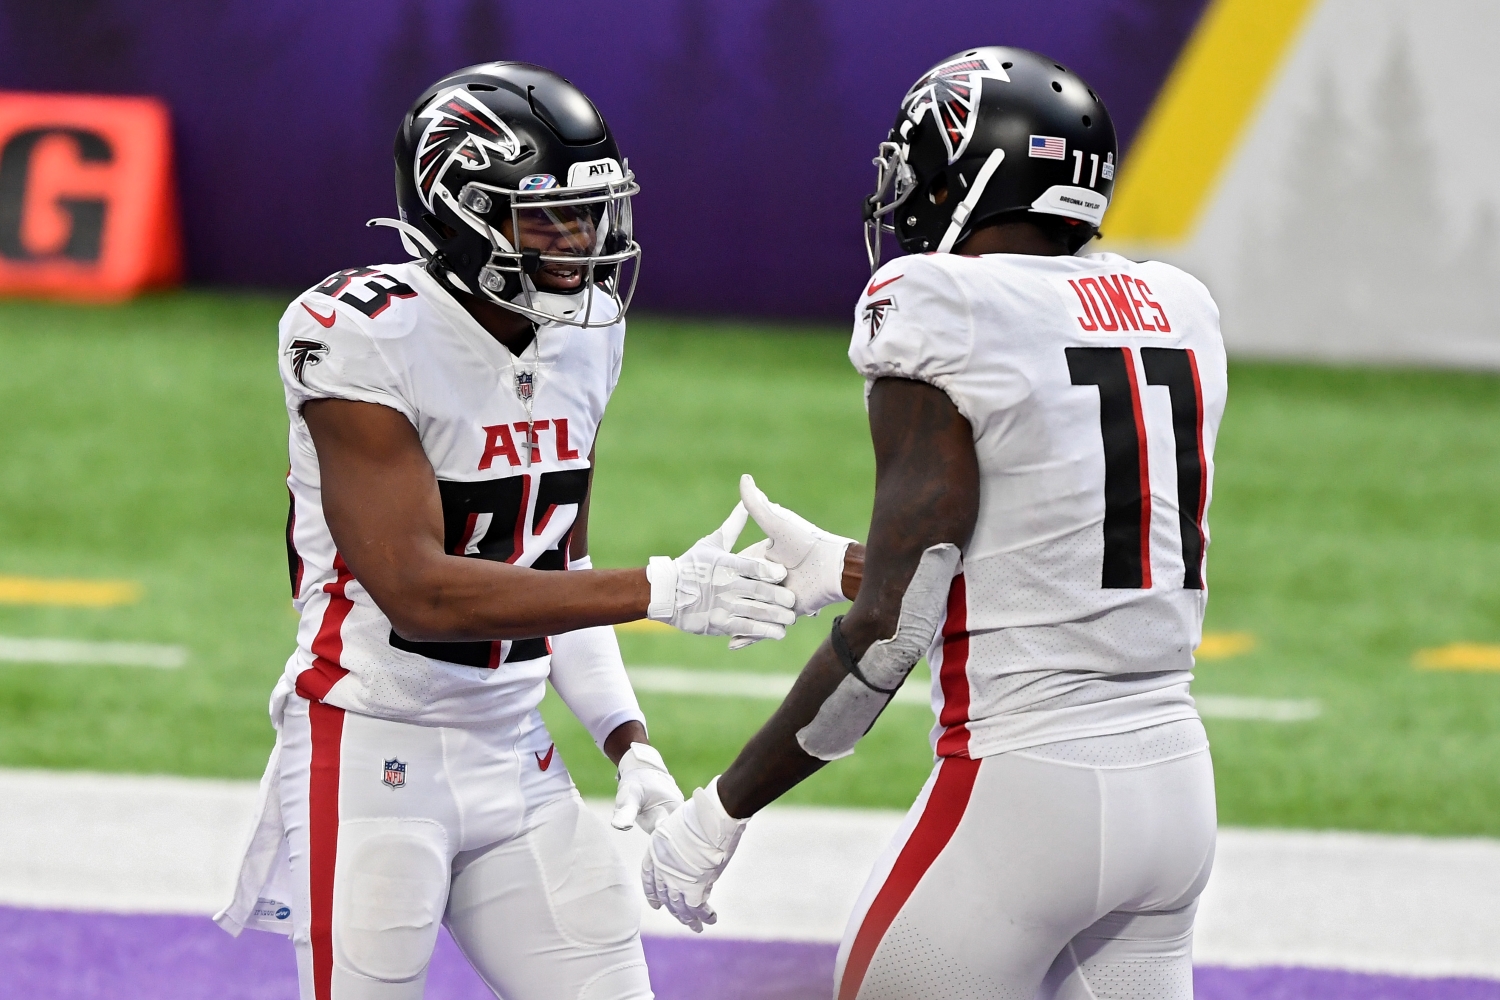 Atlanta Falcons receivers Russell Gage and Julio Jones shake hands in the end zone.